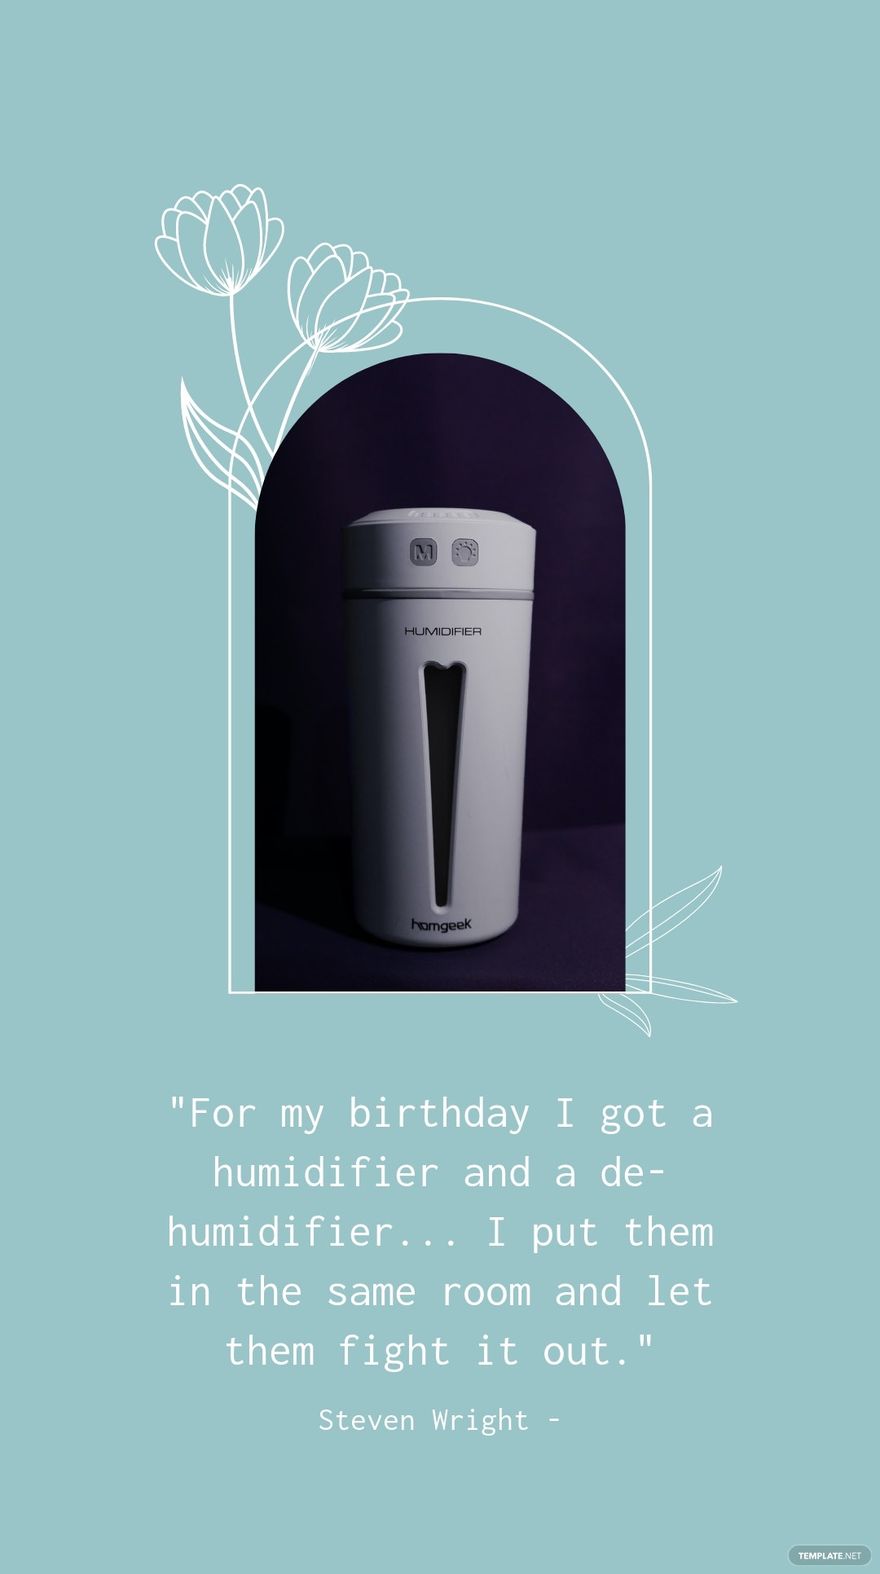 Steven Wright - For my birthday I got a humidifier and a de-humidifier... I put them in the same room and let them fight it out.